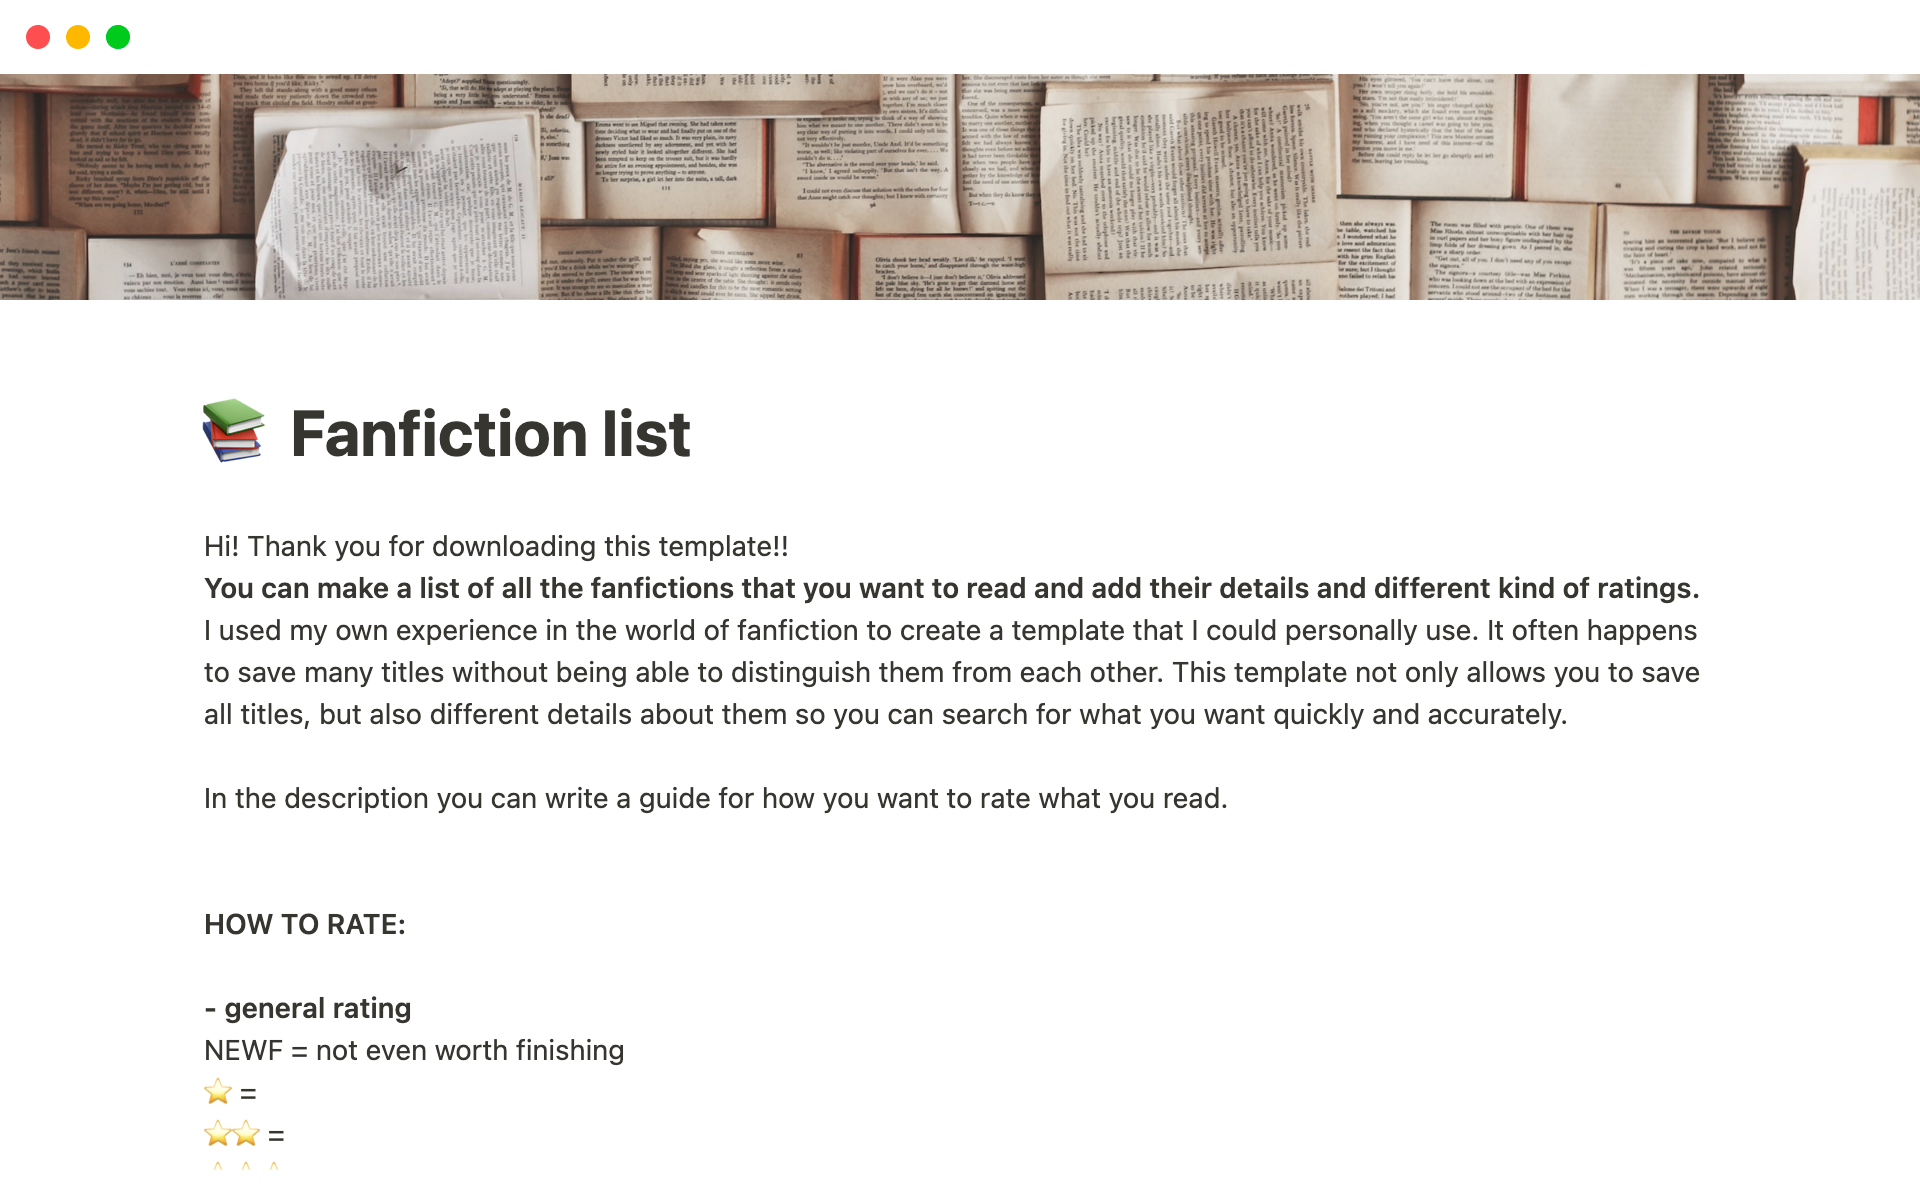 You can make a list of all the fanfictions that you want to read and add their details and different kind of ratings.